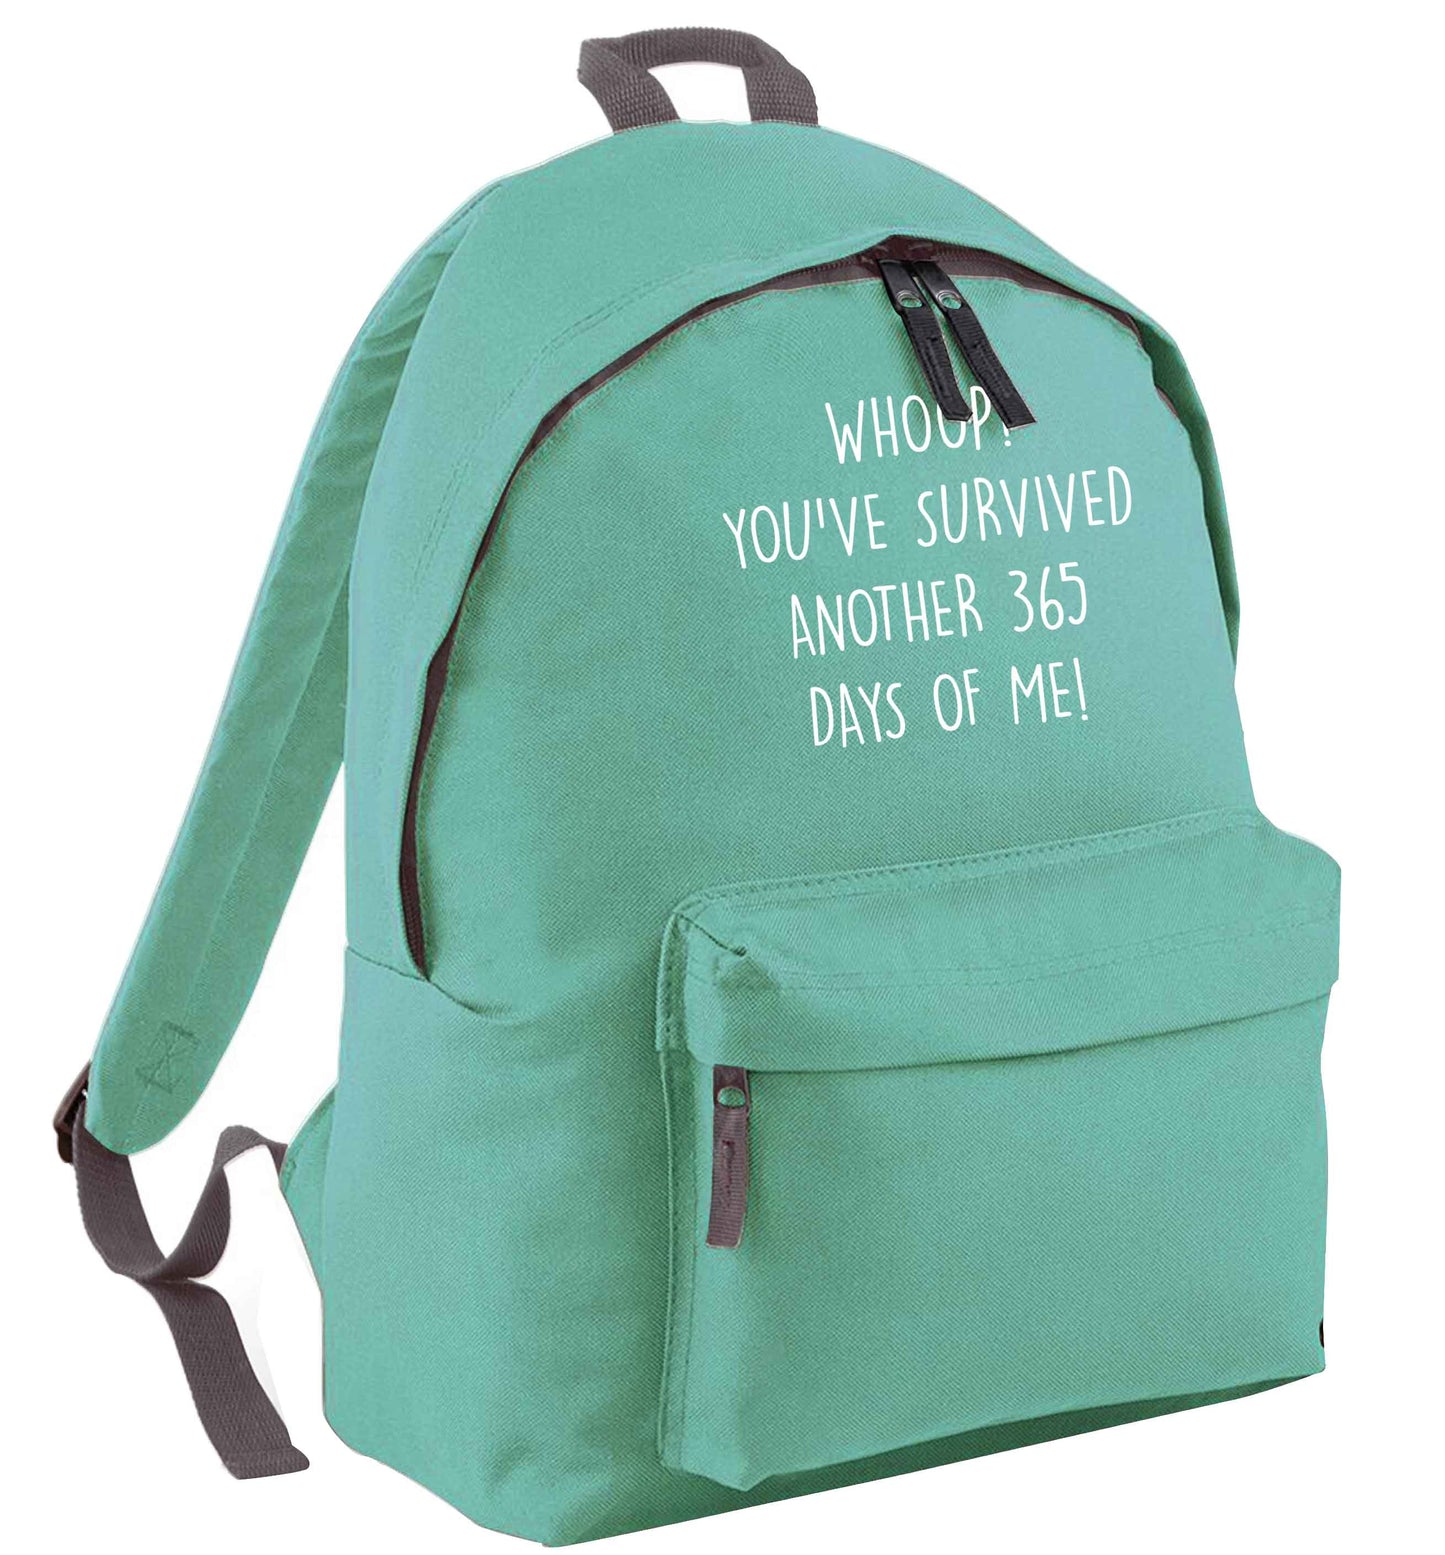 Whoop! You've survived another 365 days with me! mint adults backpack